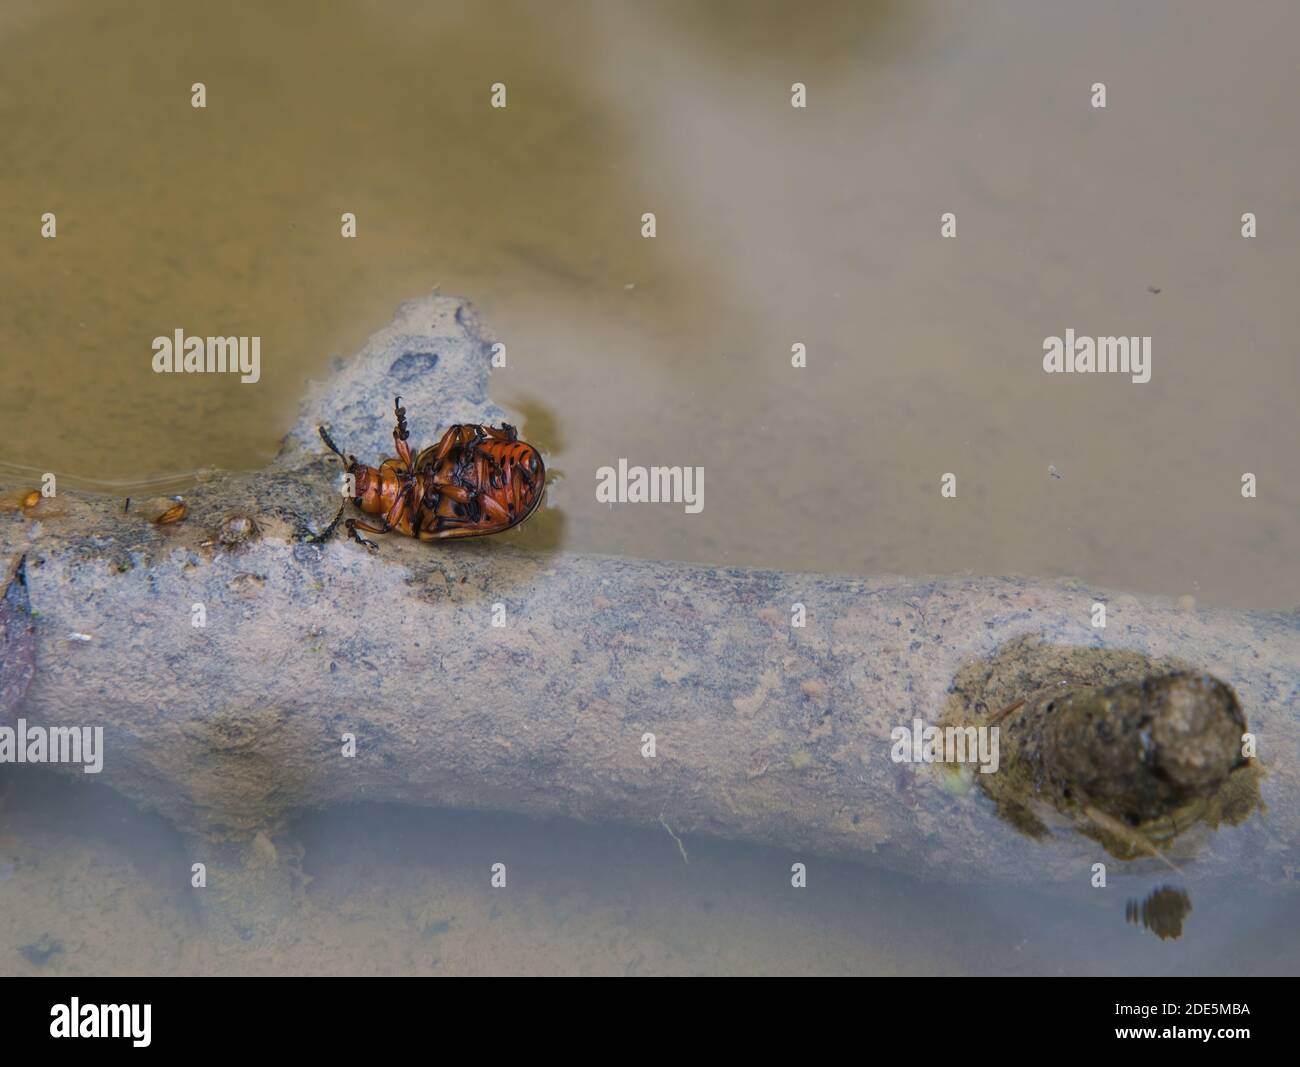 A Colorado potato beetle lies on its back on a sunken branch with its feet pointing upwards in a natural pond at the mercy of the enemy. Stock Photo